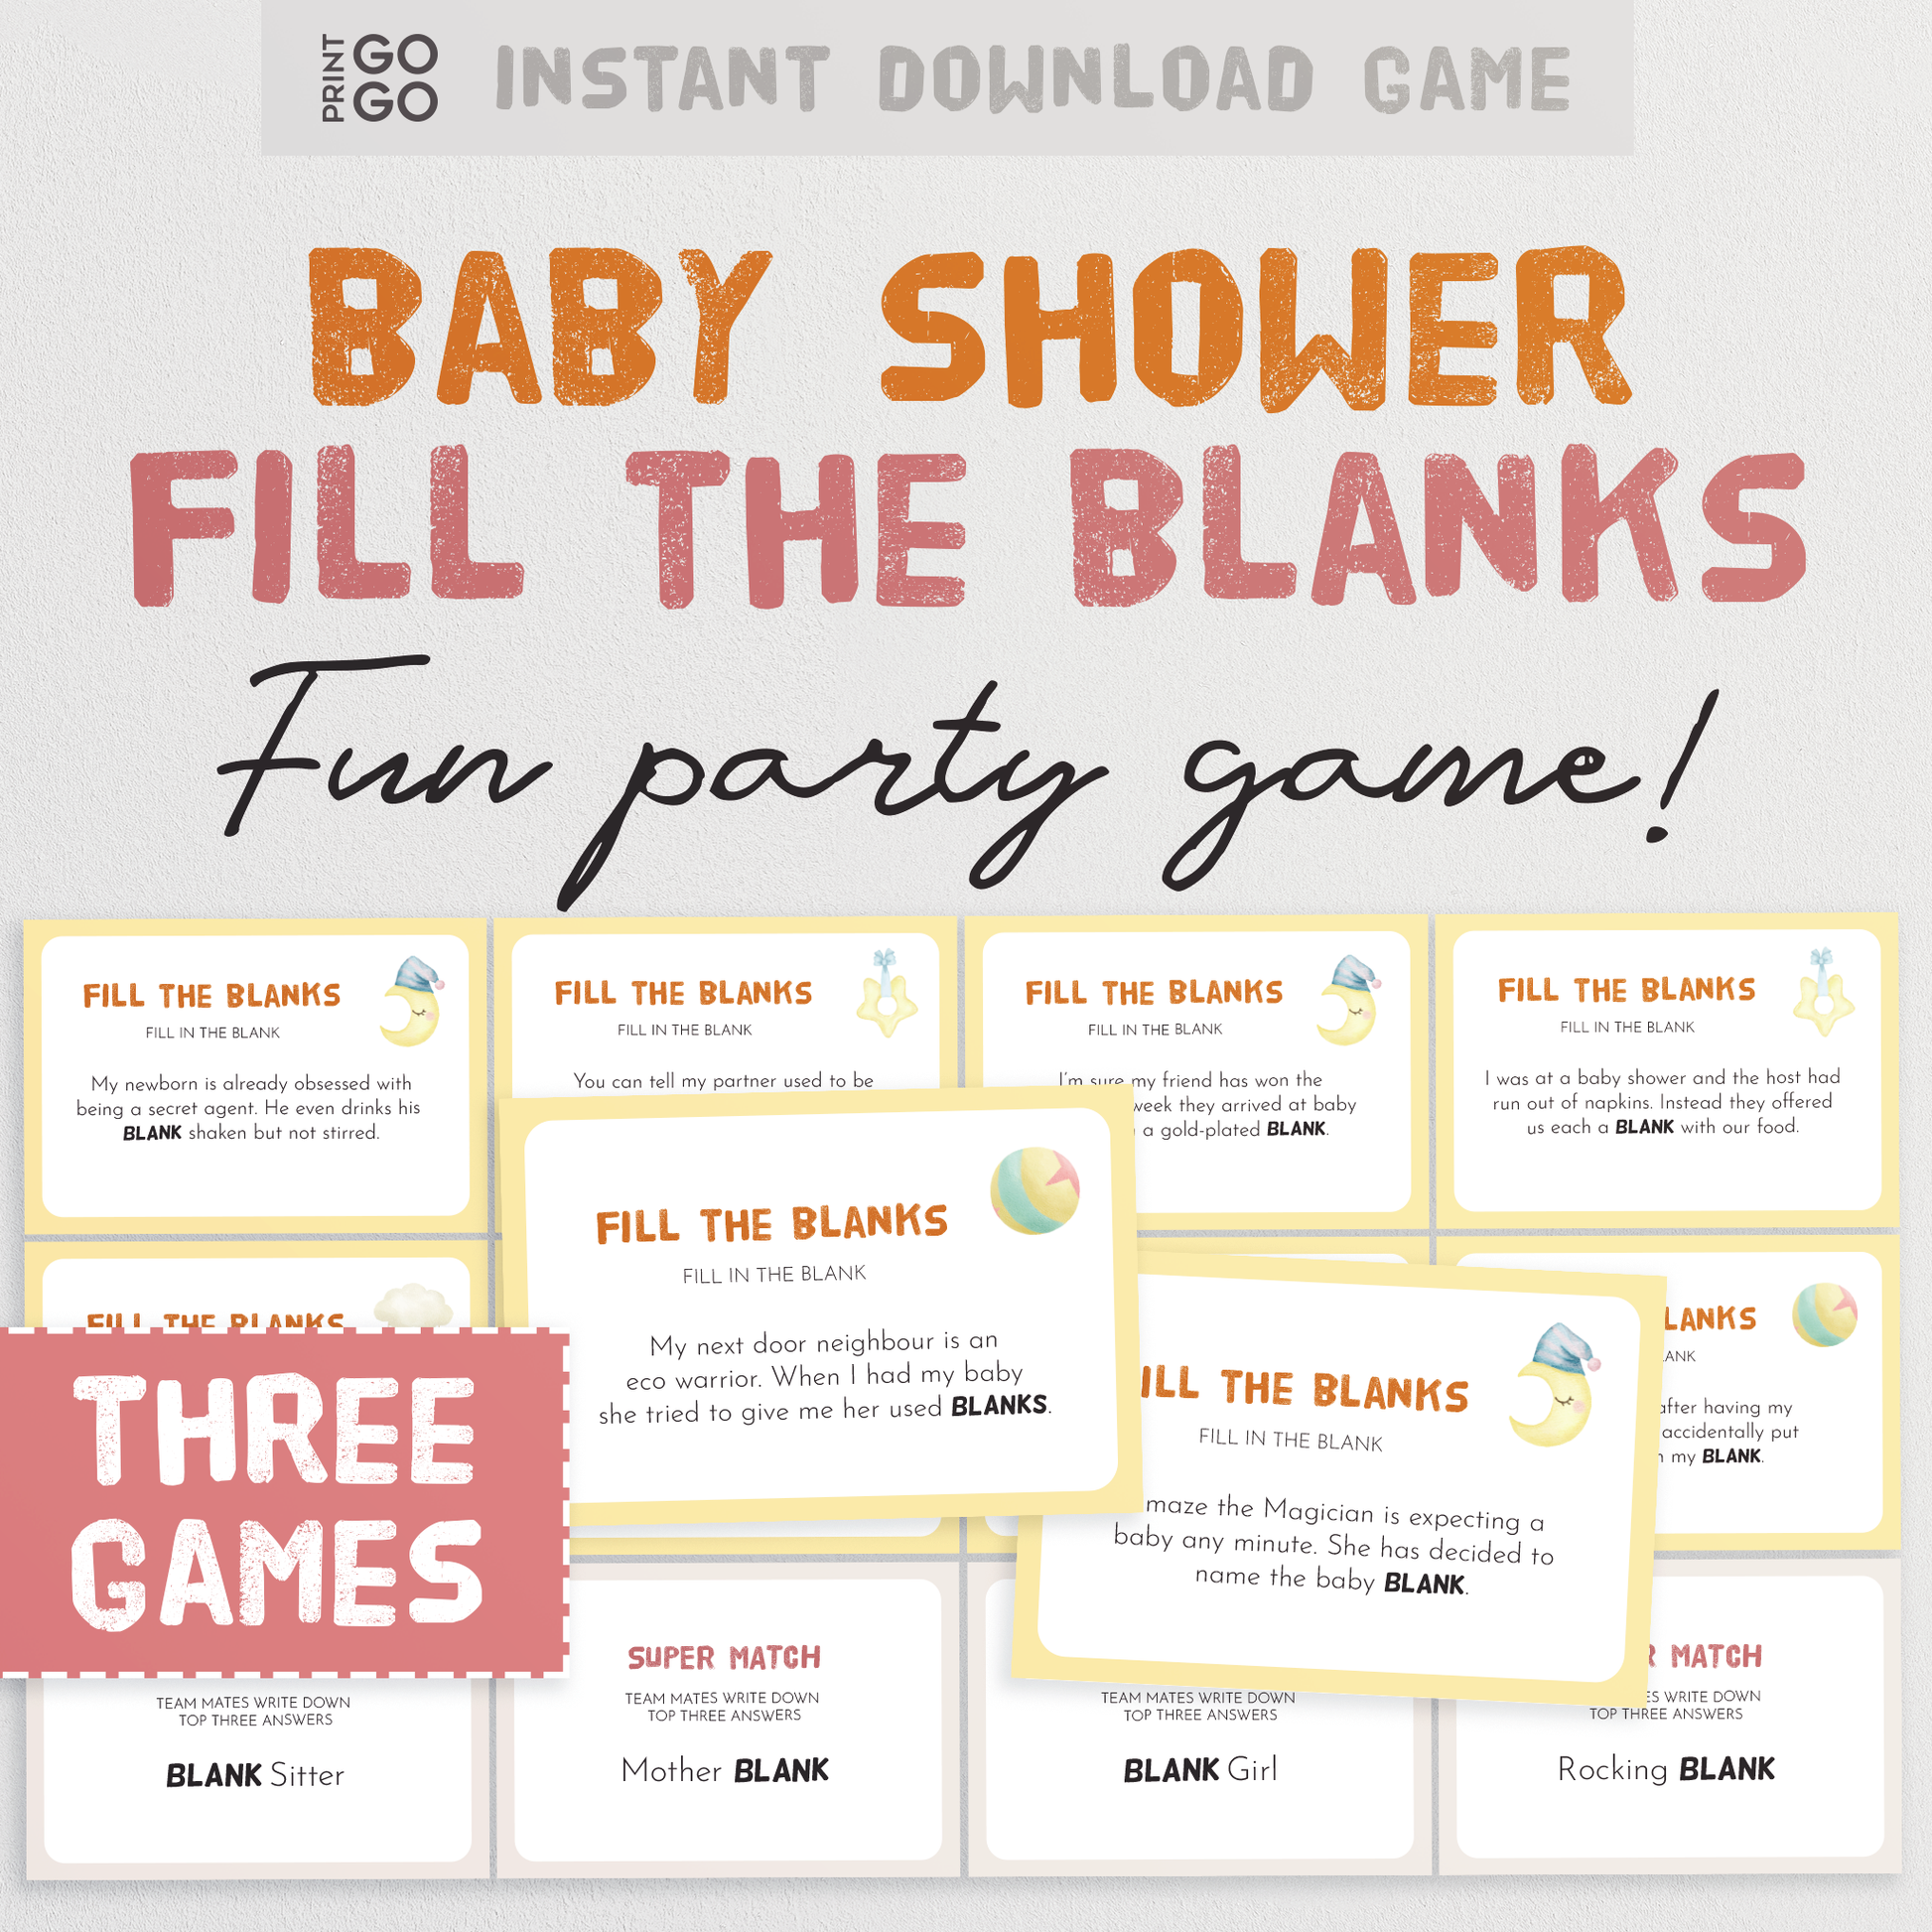 Baby Shower Fill The Blanks - The Hilarious Party Game of Completing Missing Words!